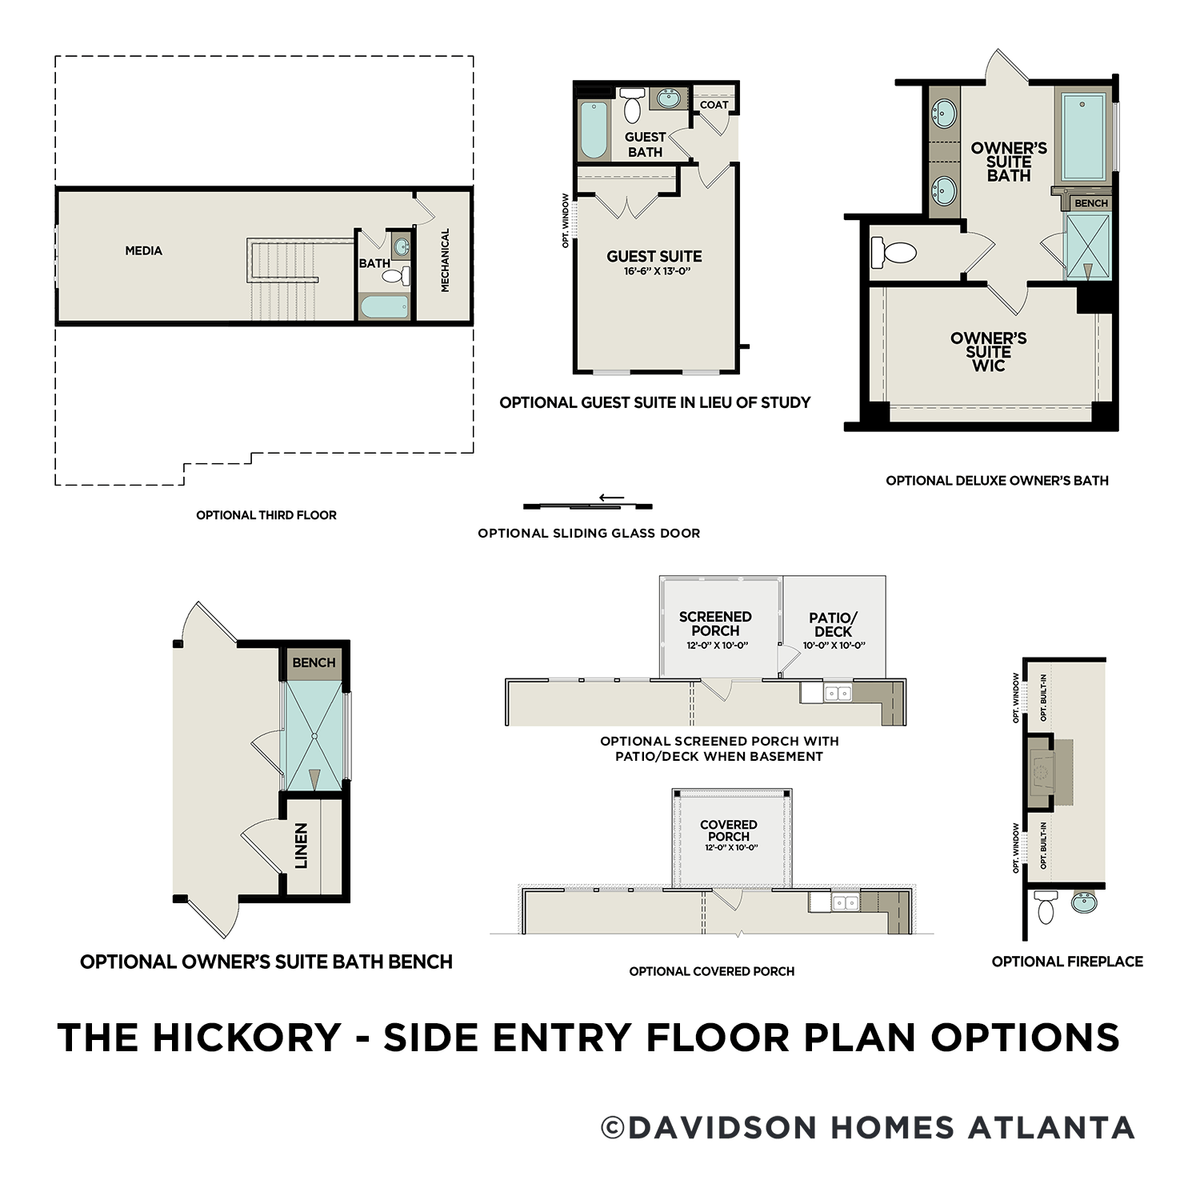 3 - The Hickory A – Side Entry floor plan layout for 14 Riverburch Run in Davidson Homes' Riverwood community.